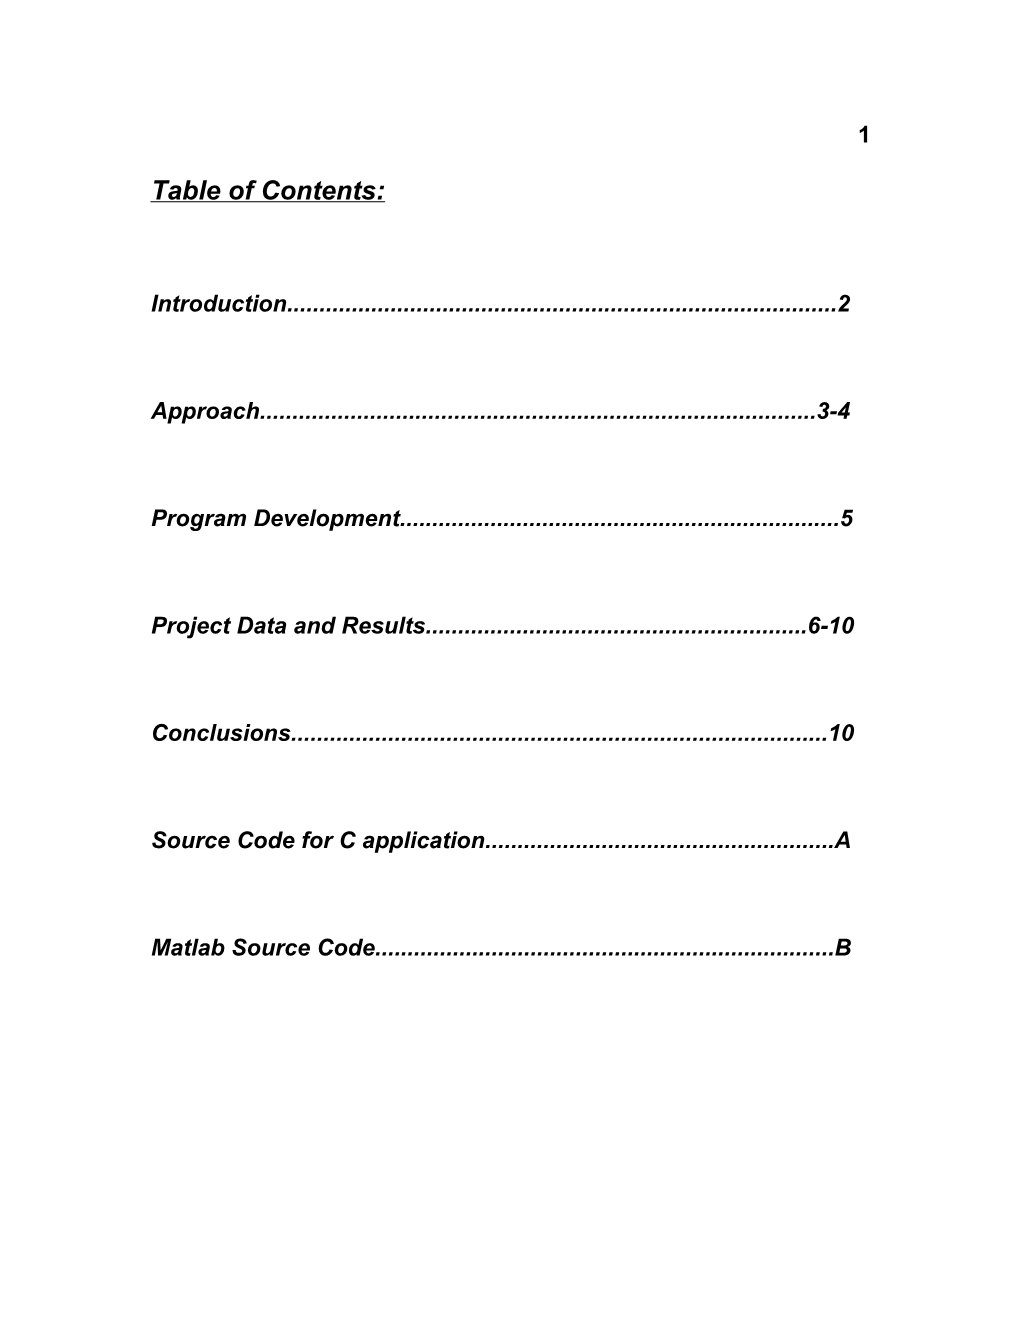 Table of Contents s625